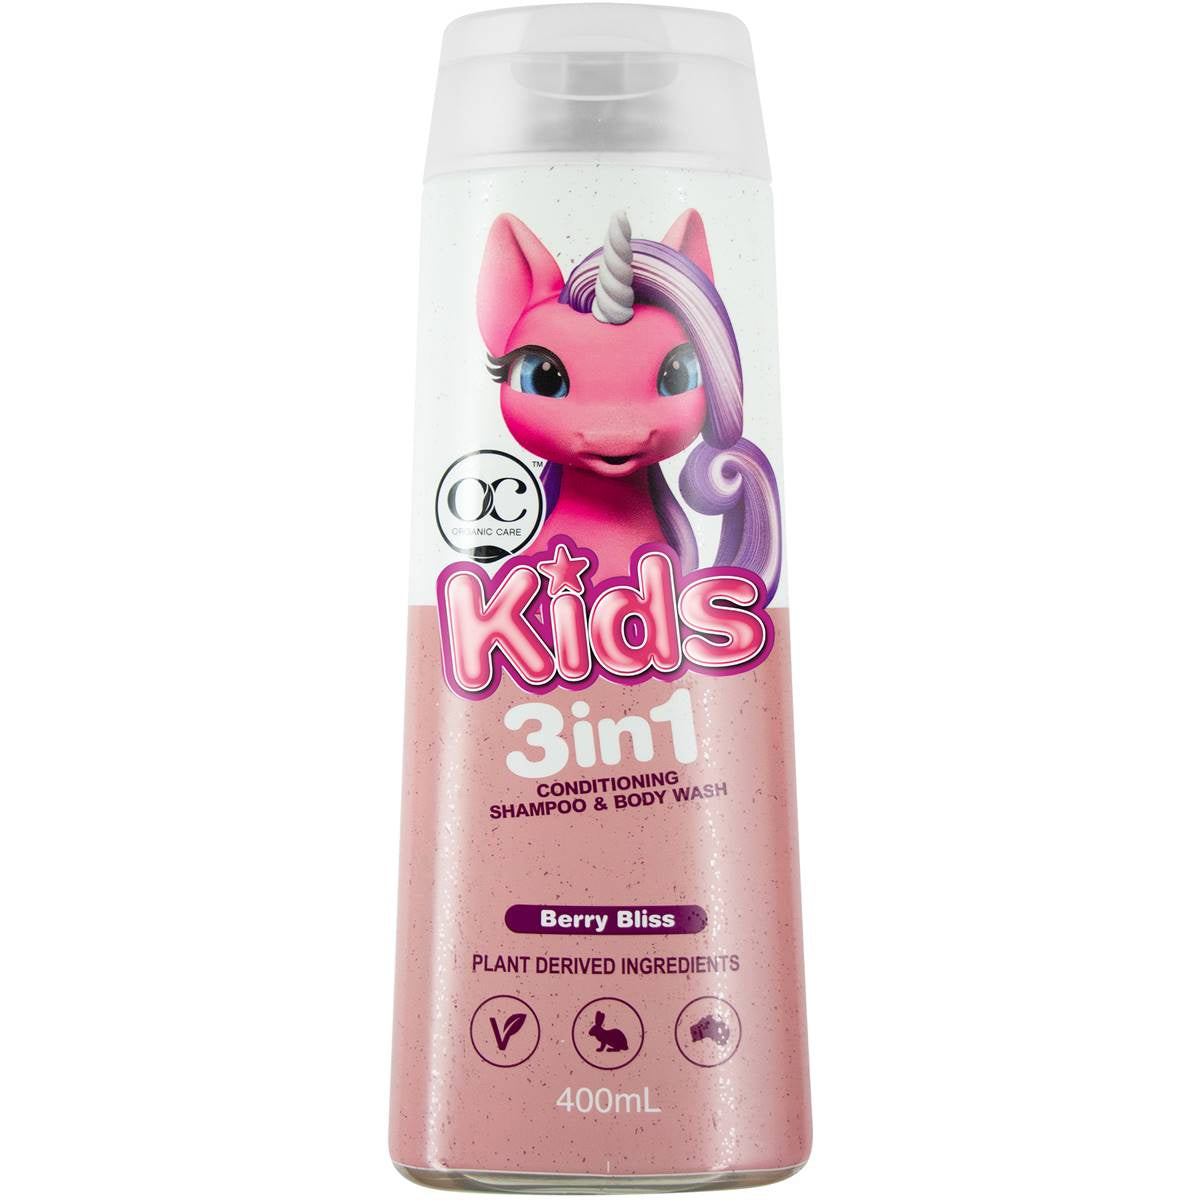 Organic Care Kids Hair Care 3 in 1 Berry Bliss 400ml